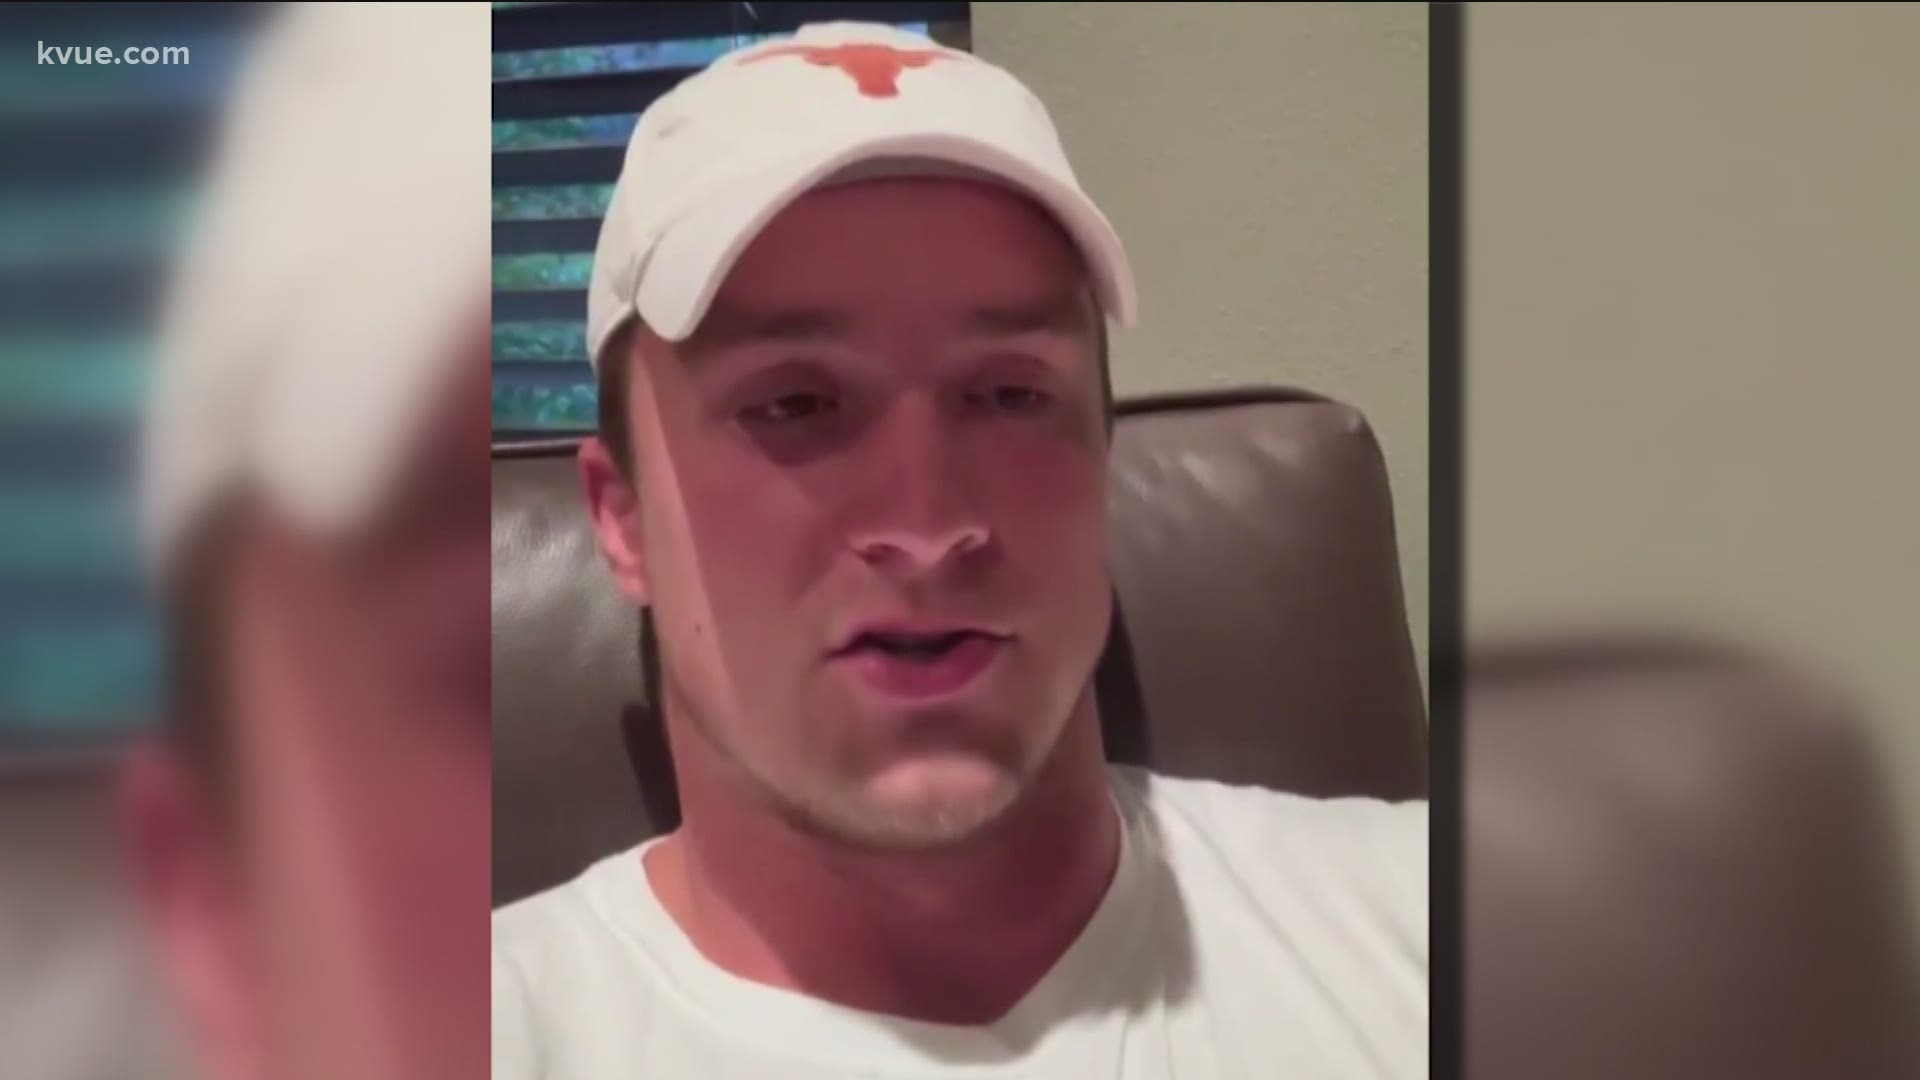 Both UT players and coaches are calling for change. Coach Tom Herman, Sam Ehlinger and basketball player Donovan Williams have all posted on social media.